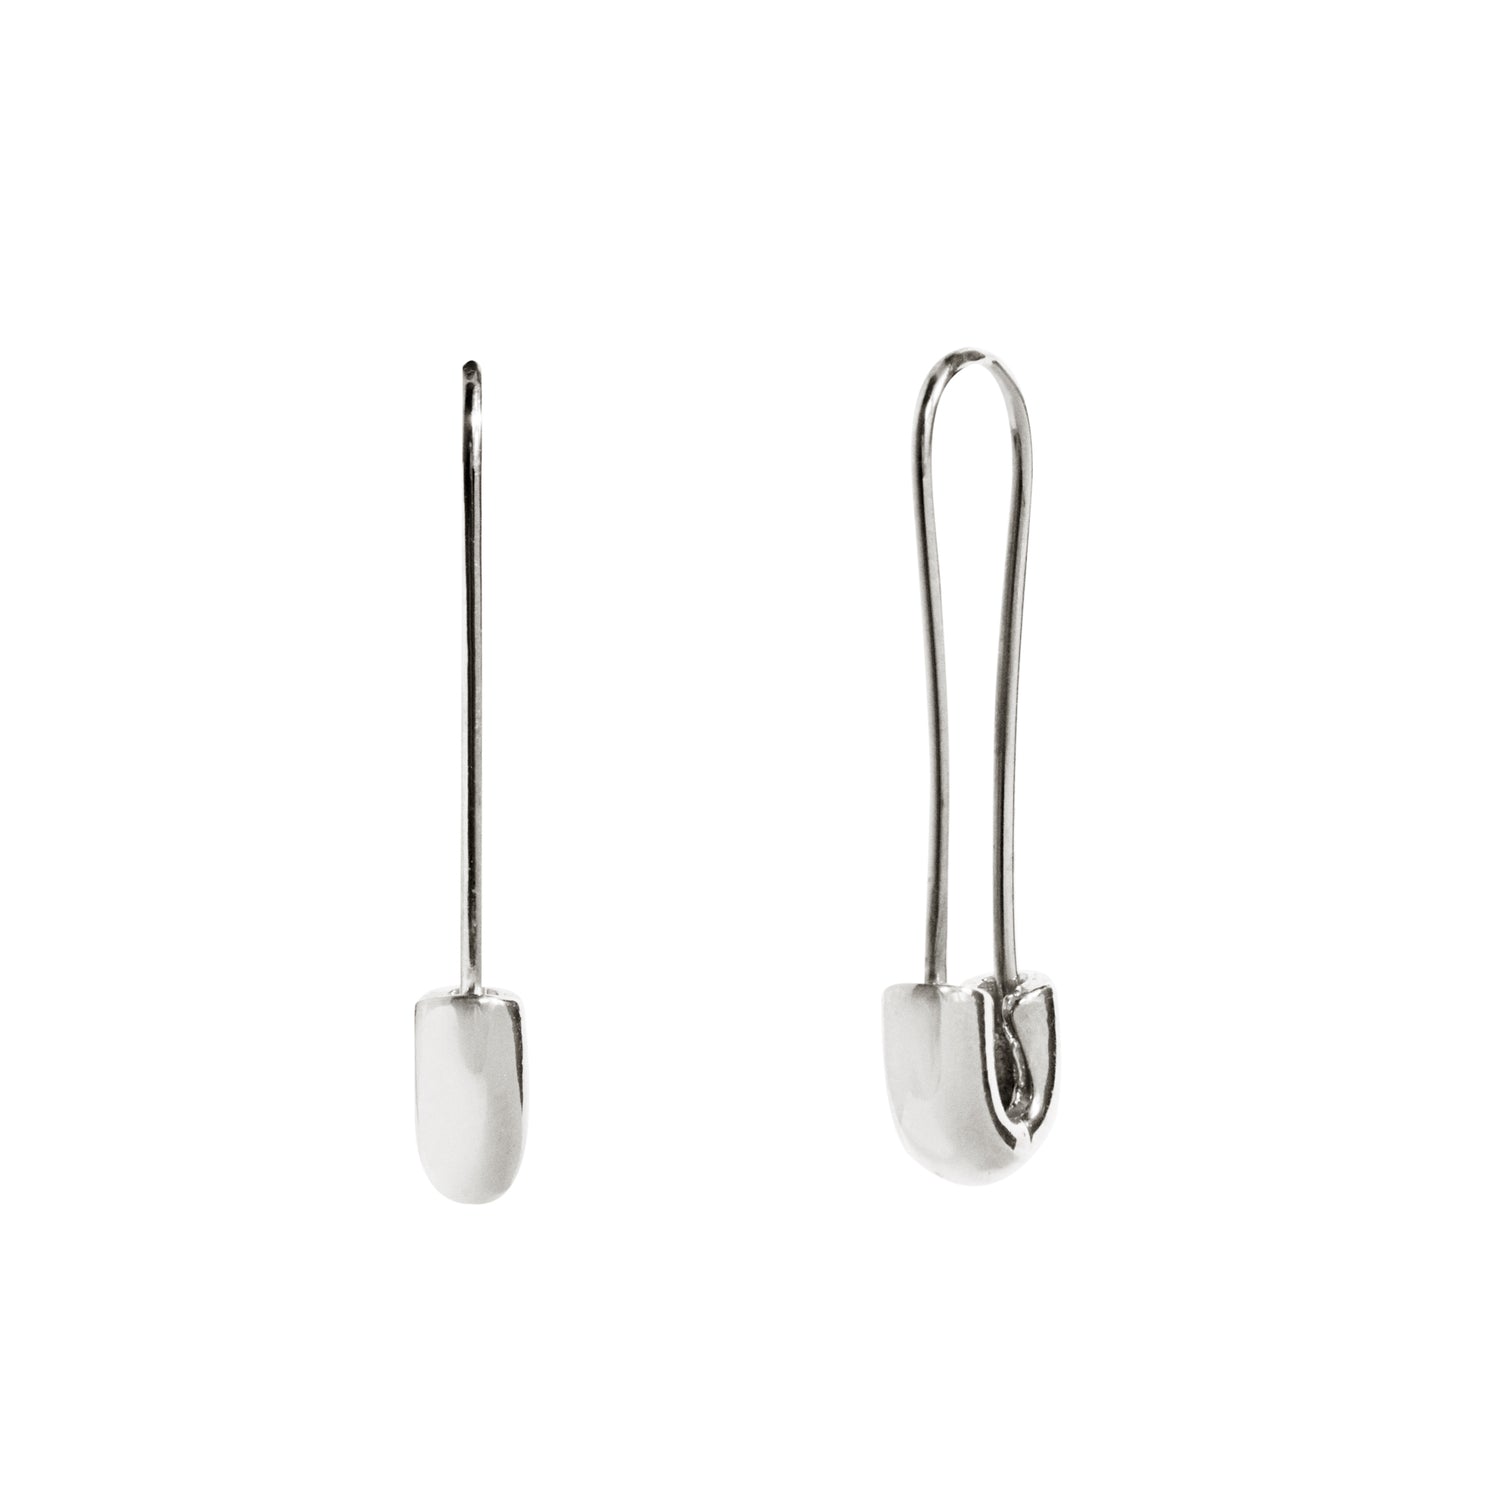 Safety Pin Earrings - Silver